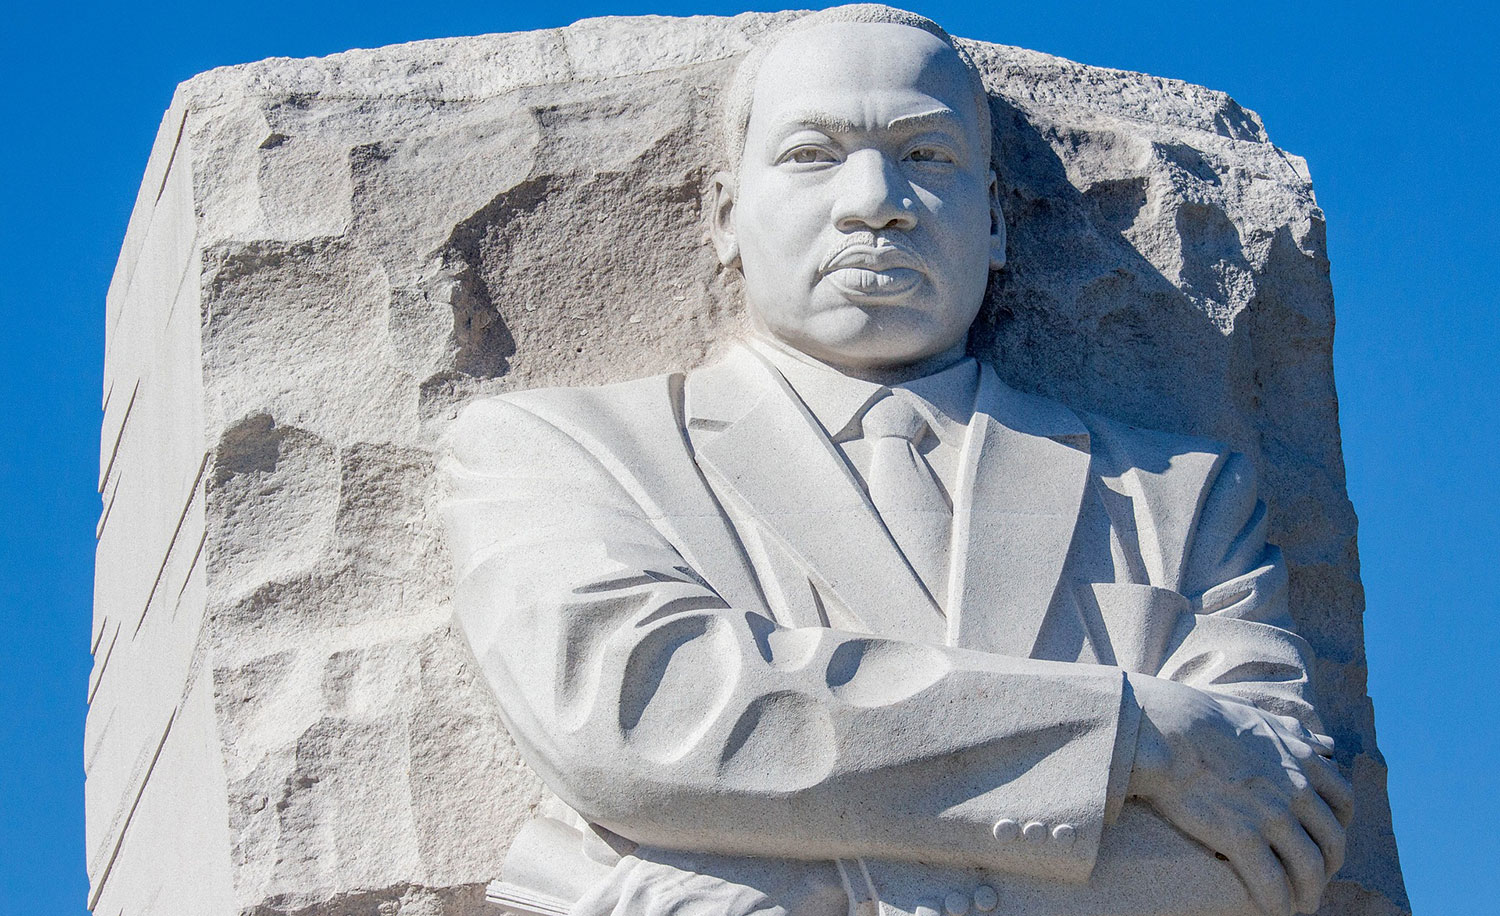 A statue of Dr. Martin Luther King Jr., who may have been a highly sensitive person